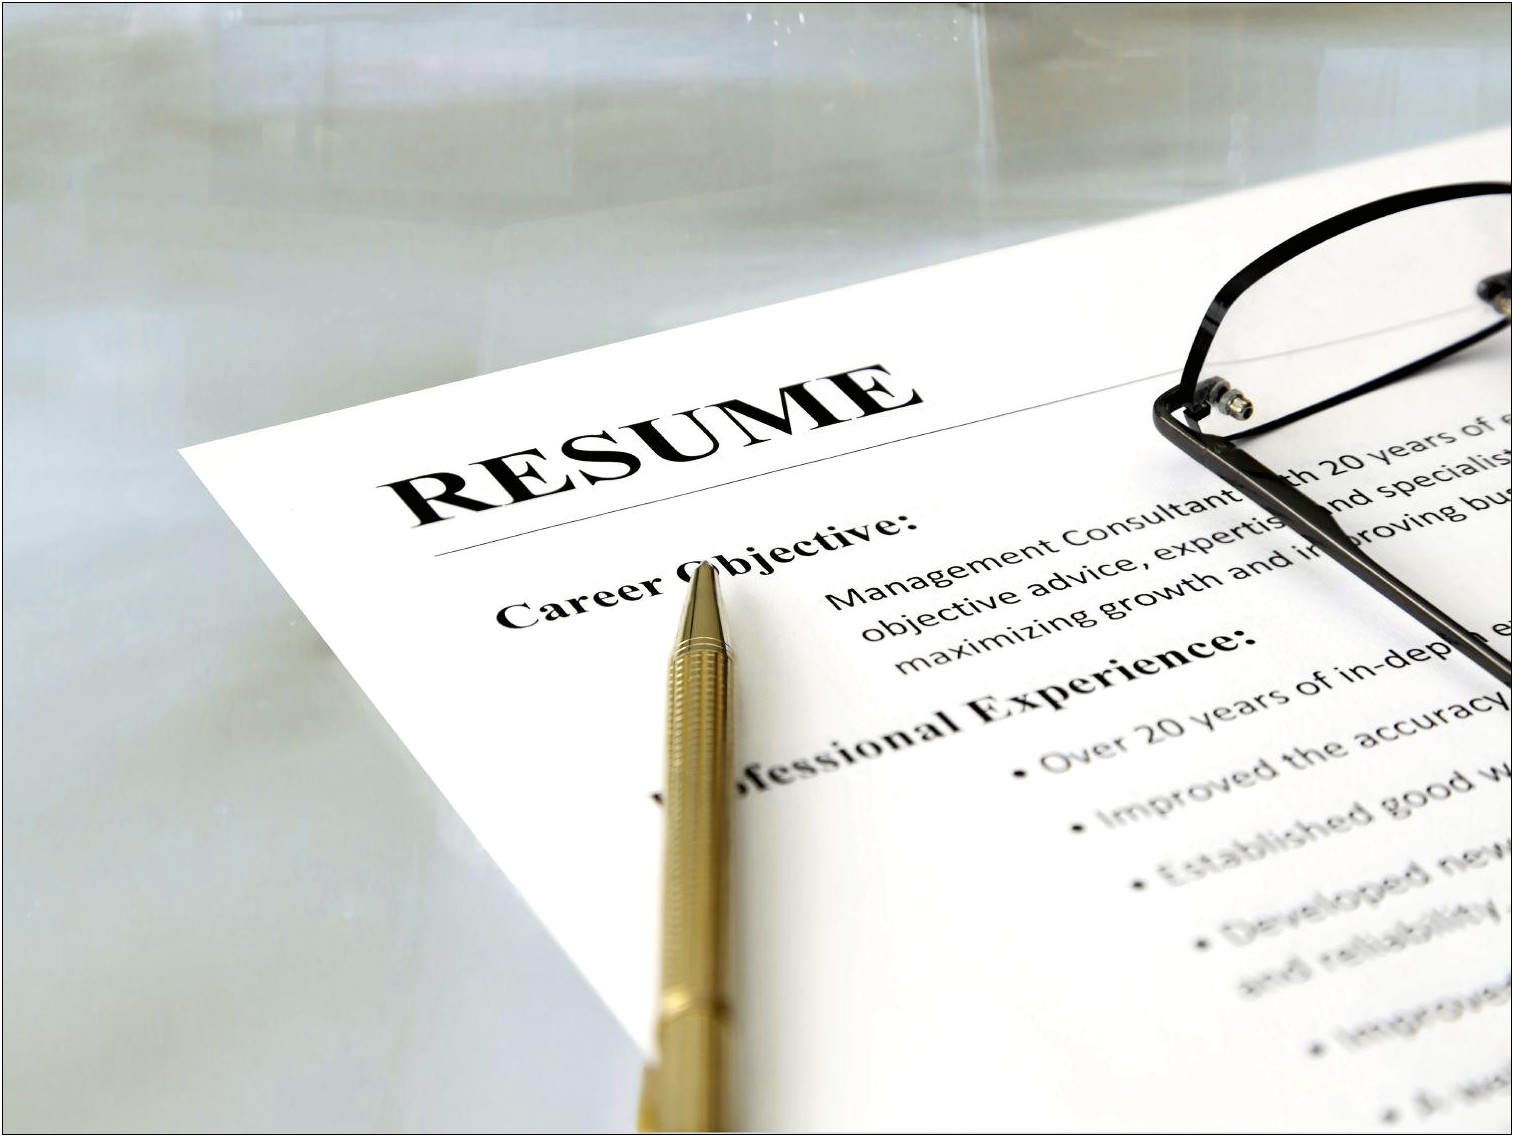 Different Kinds Of Objectives In Resume